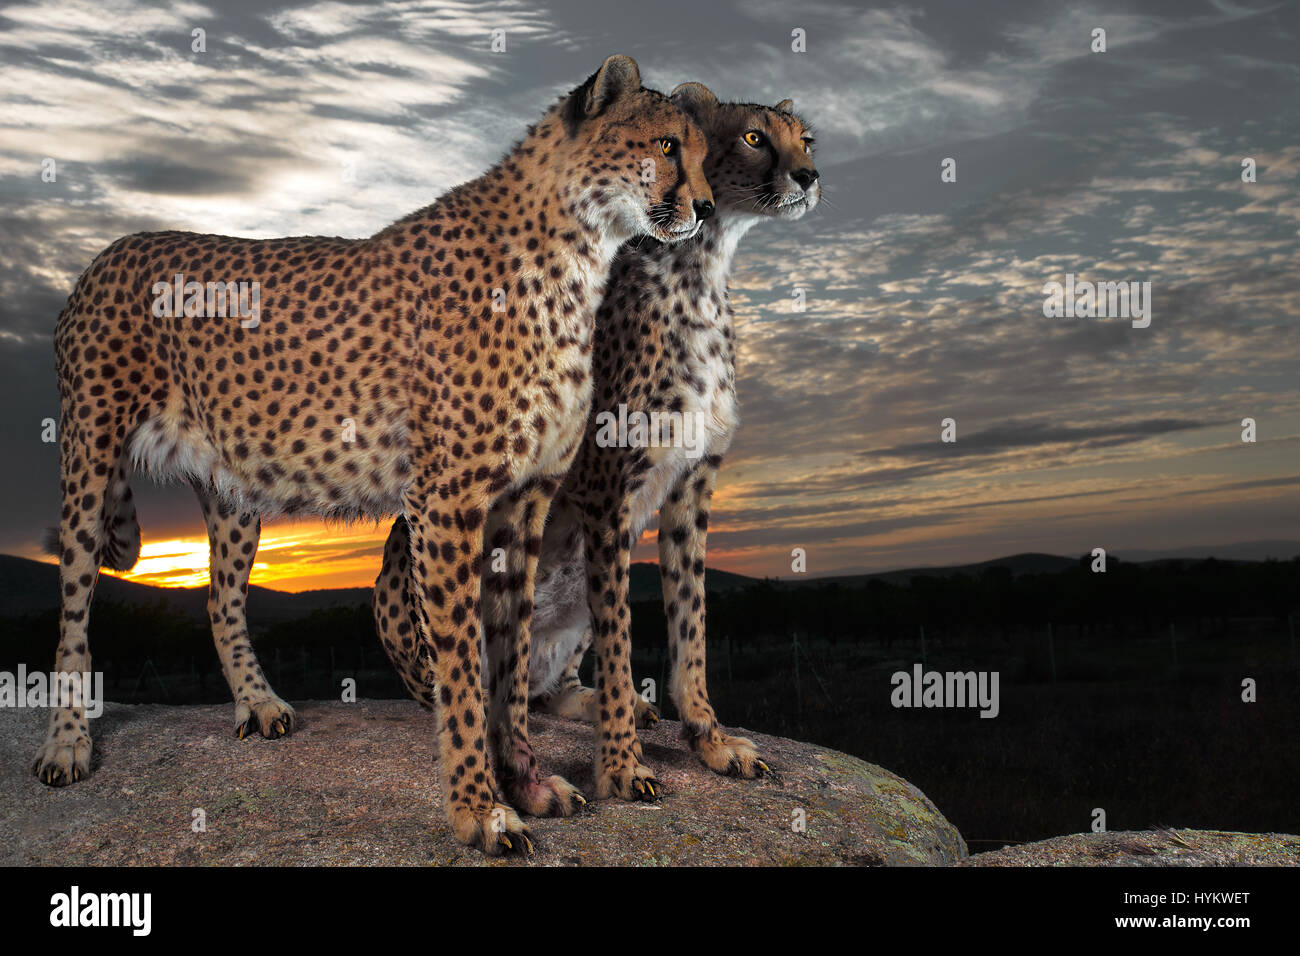 TOLEDO, SPAIN: BIG CATS as up close as you’ll see them have been captured in these breath-taking pictures. Totally at ease with people coming into close contact with them, these cheetahs are seen happily striking a pose for pictures, even allowing one very excited photographer to sit just behind while his wife captured the special moment as the sun went down.  German born Carlos Santero (49) and his wife, spent a total of two days at a private reserve in Toledo Spain, home to these exquisite animals. Stock Photo